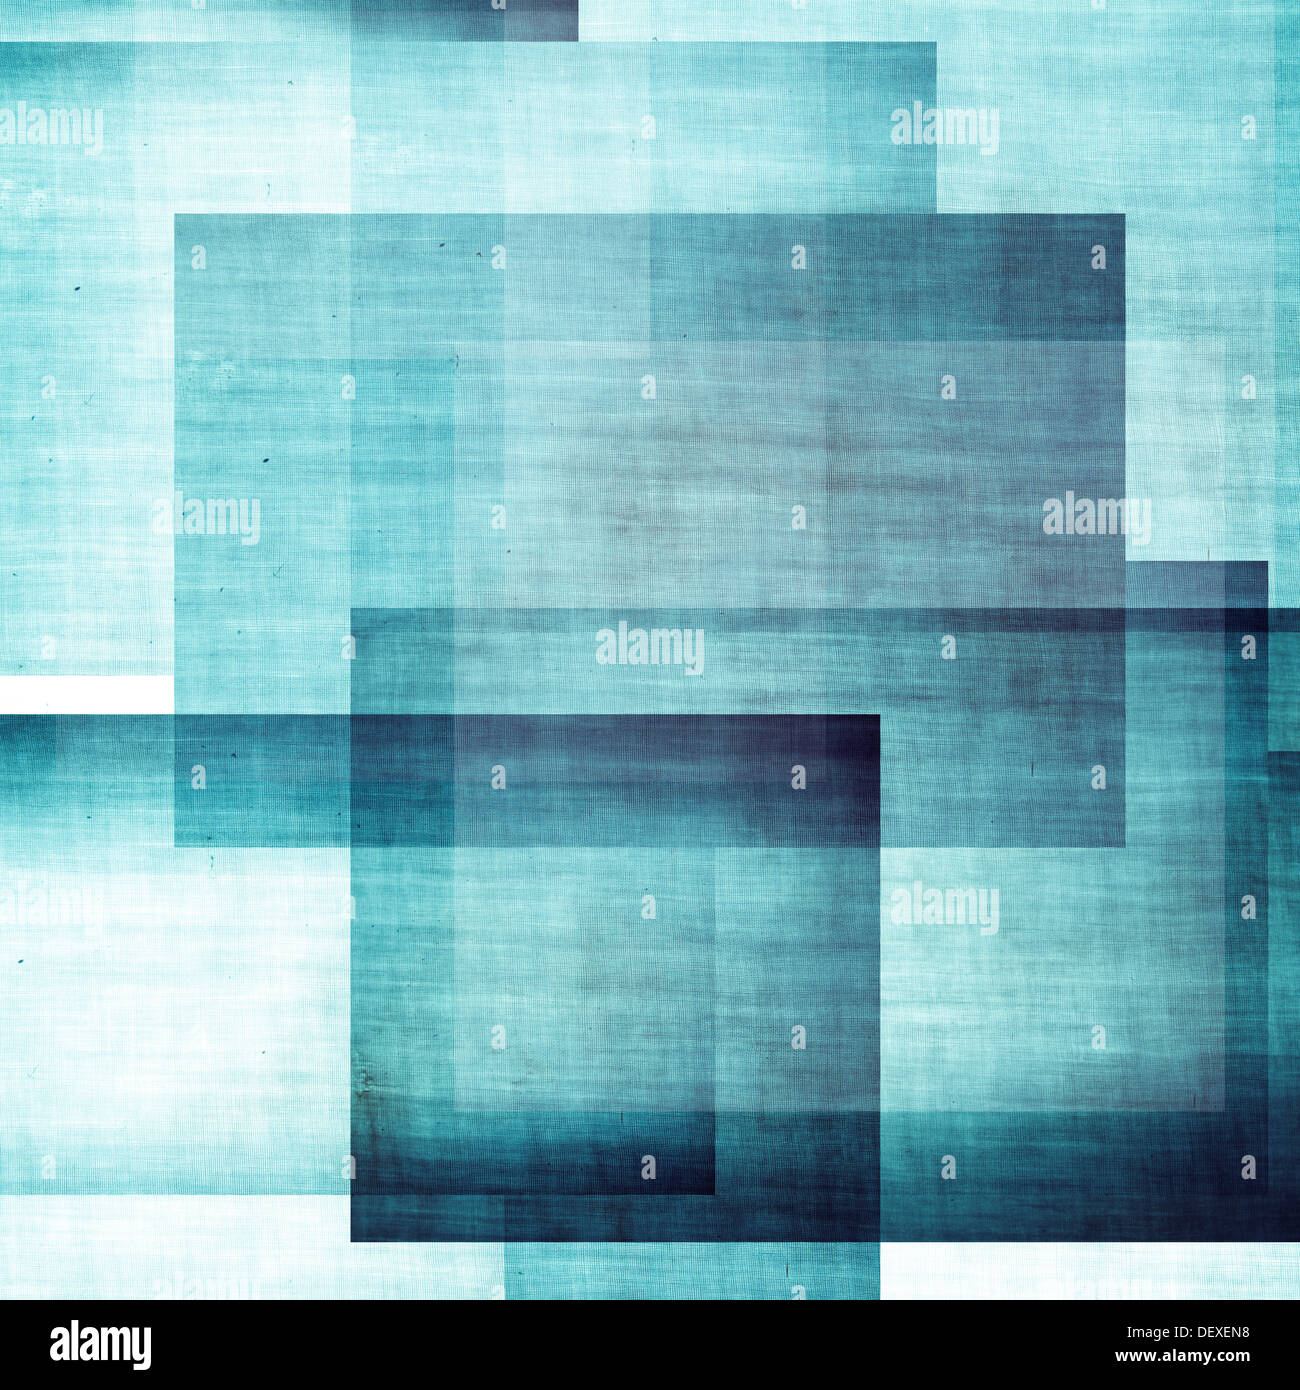 Blue tone squares abstract background Stock Photo